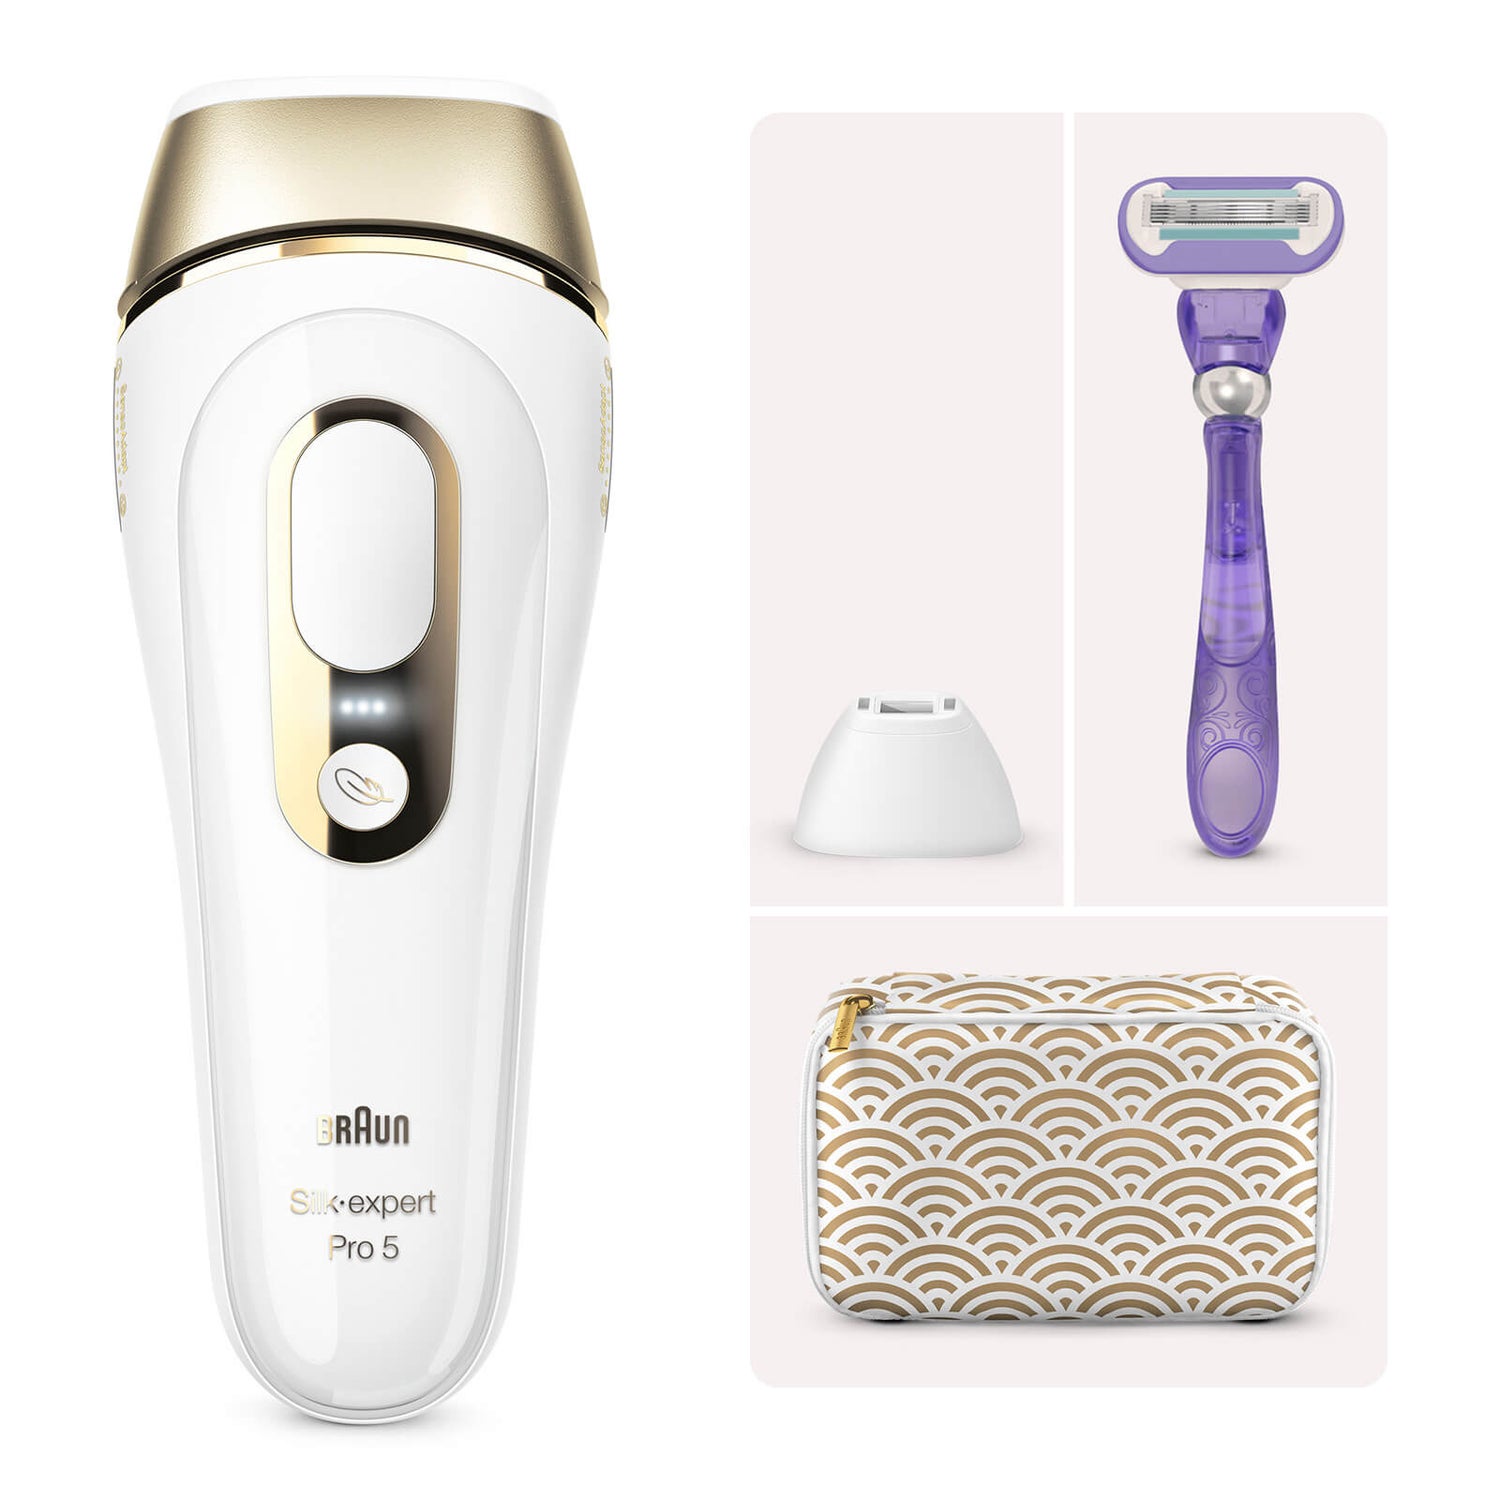 Braun Silk-expert Pro 5 IPL with Precision Head, Razor and Deluxe Pouch